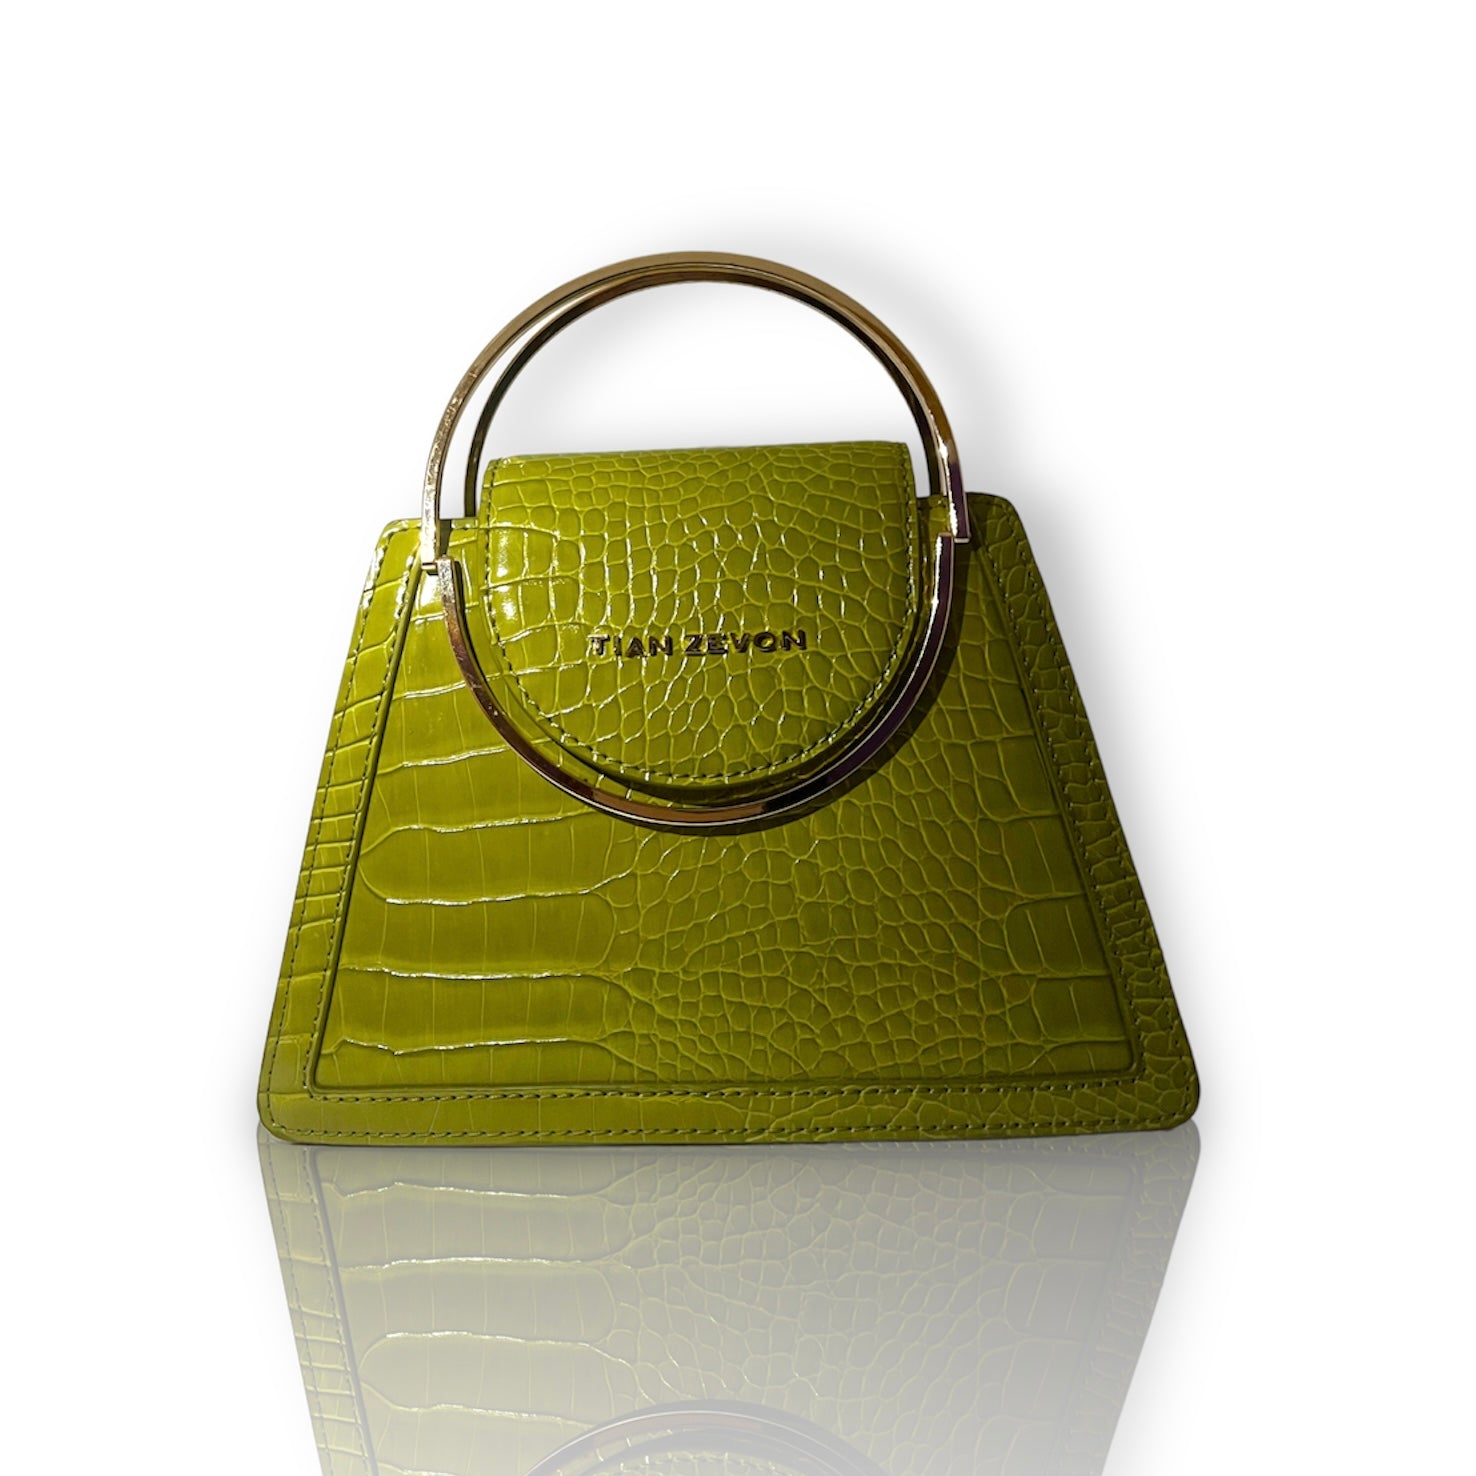 GISSELLE leather top handle bag - Citrus Green